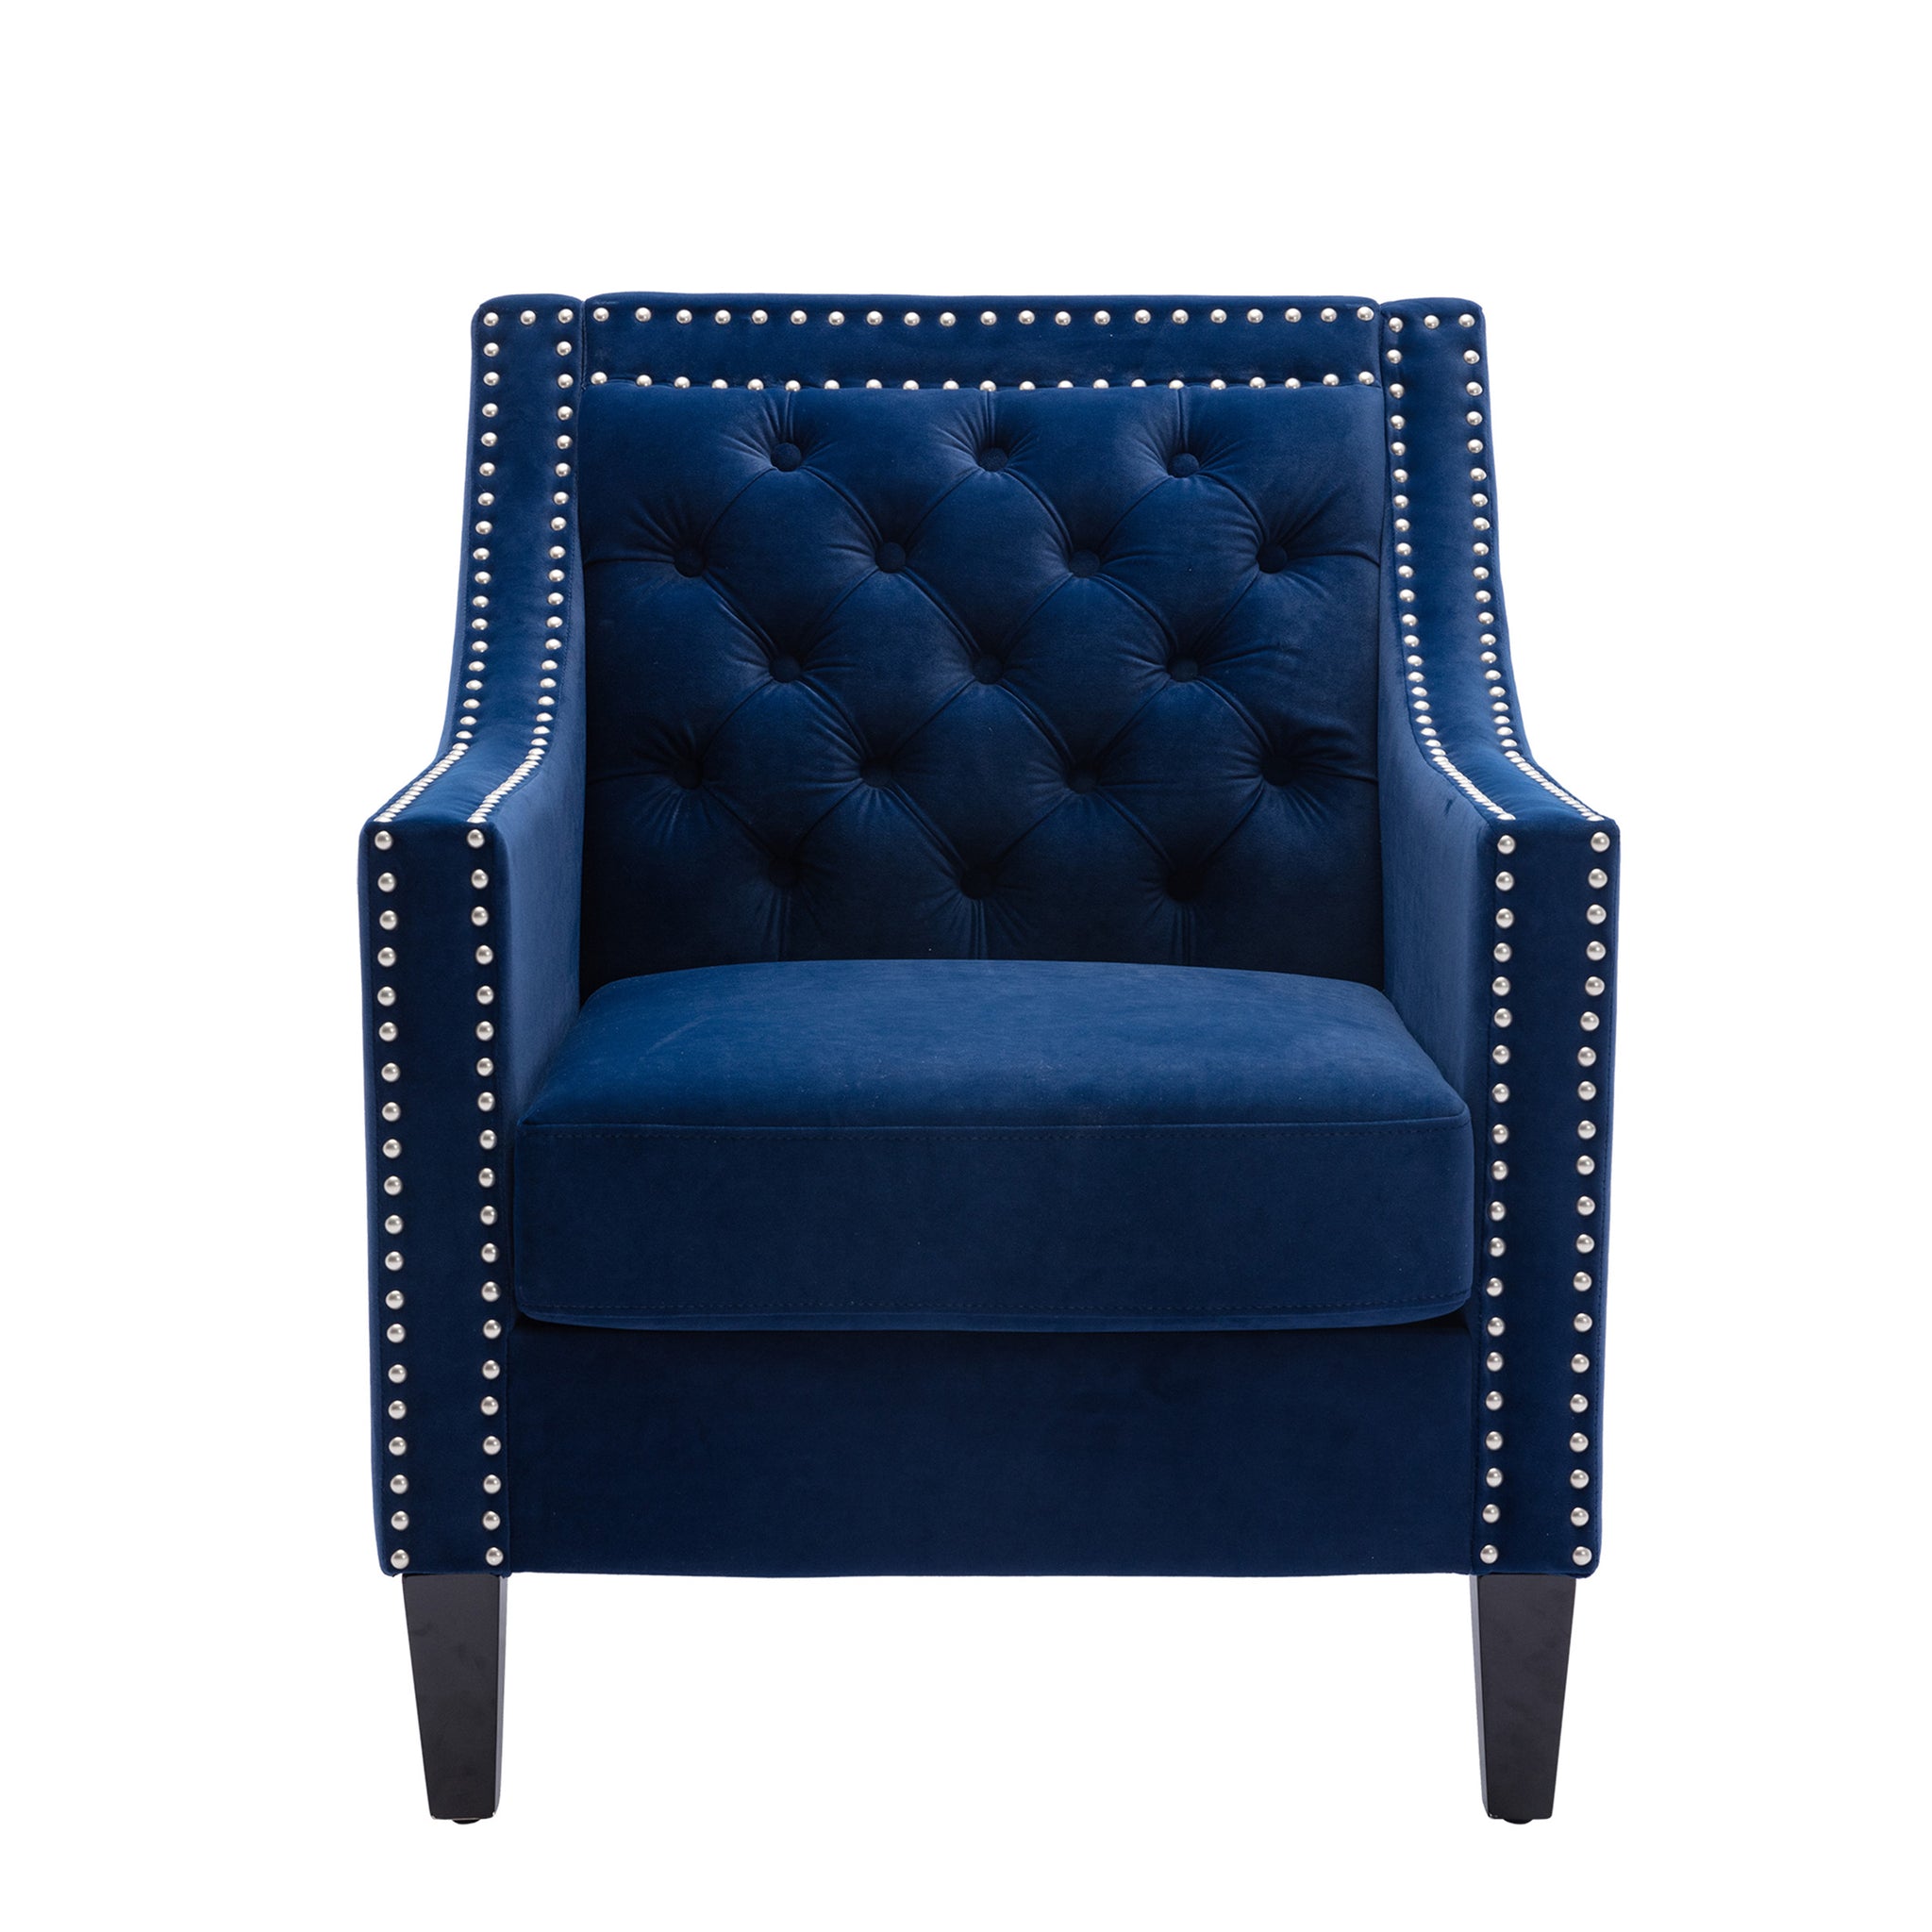 RaDEWAY accent armchair living room chair with nailheads and solid wood legs